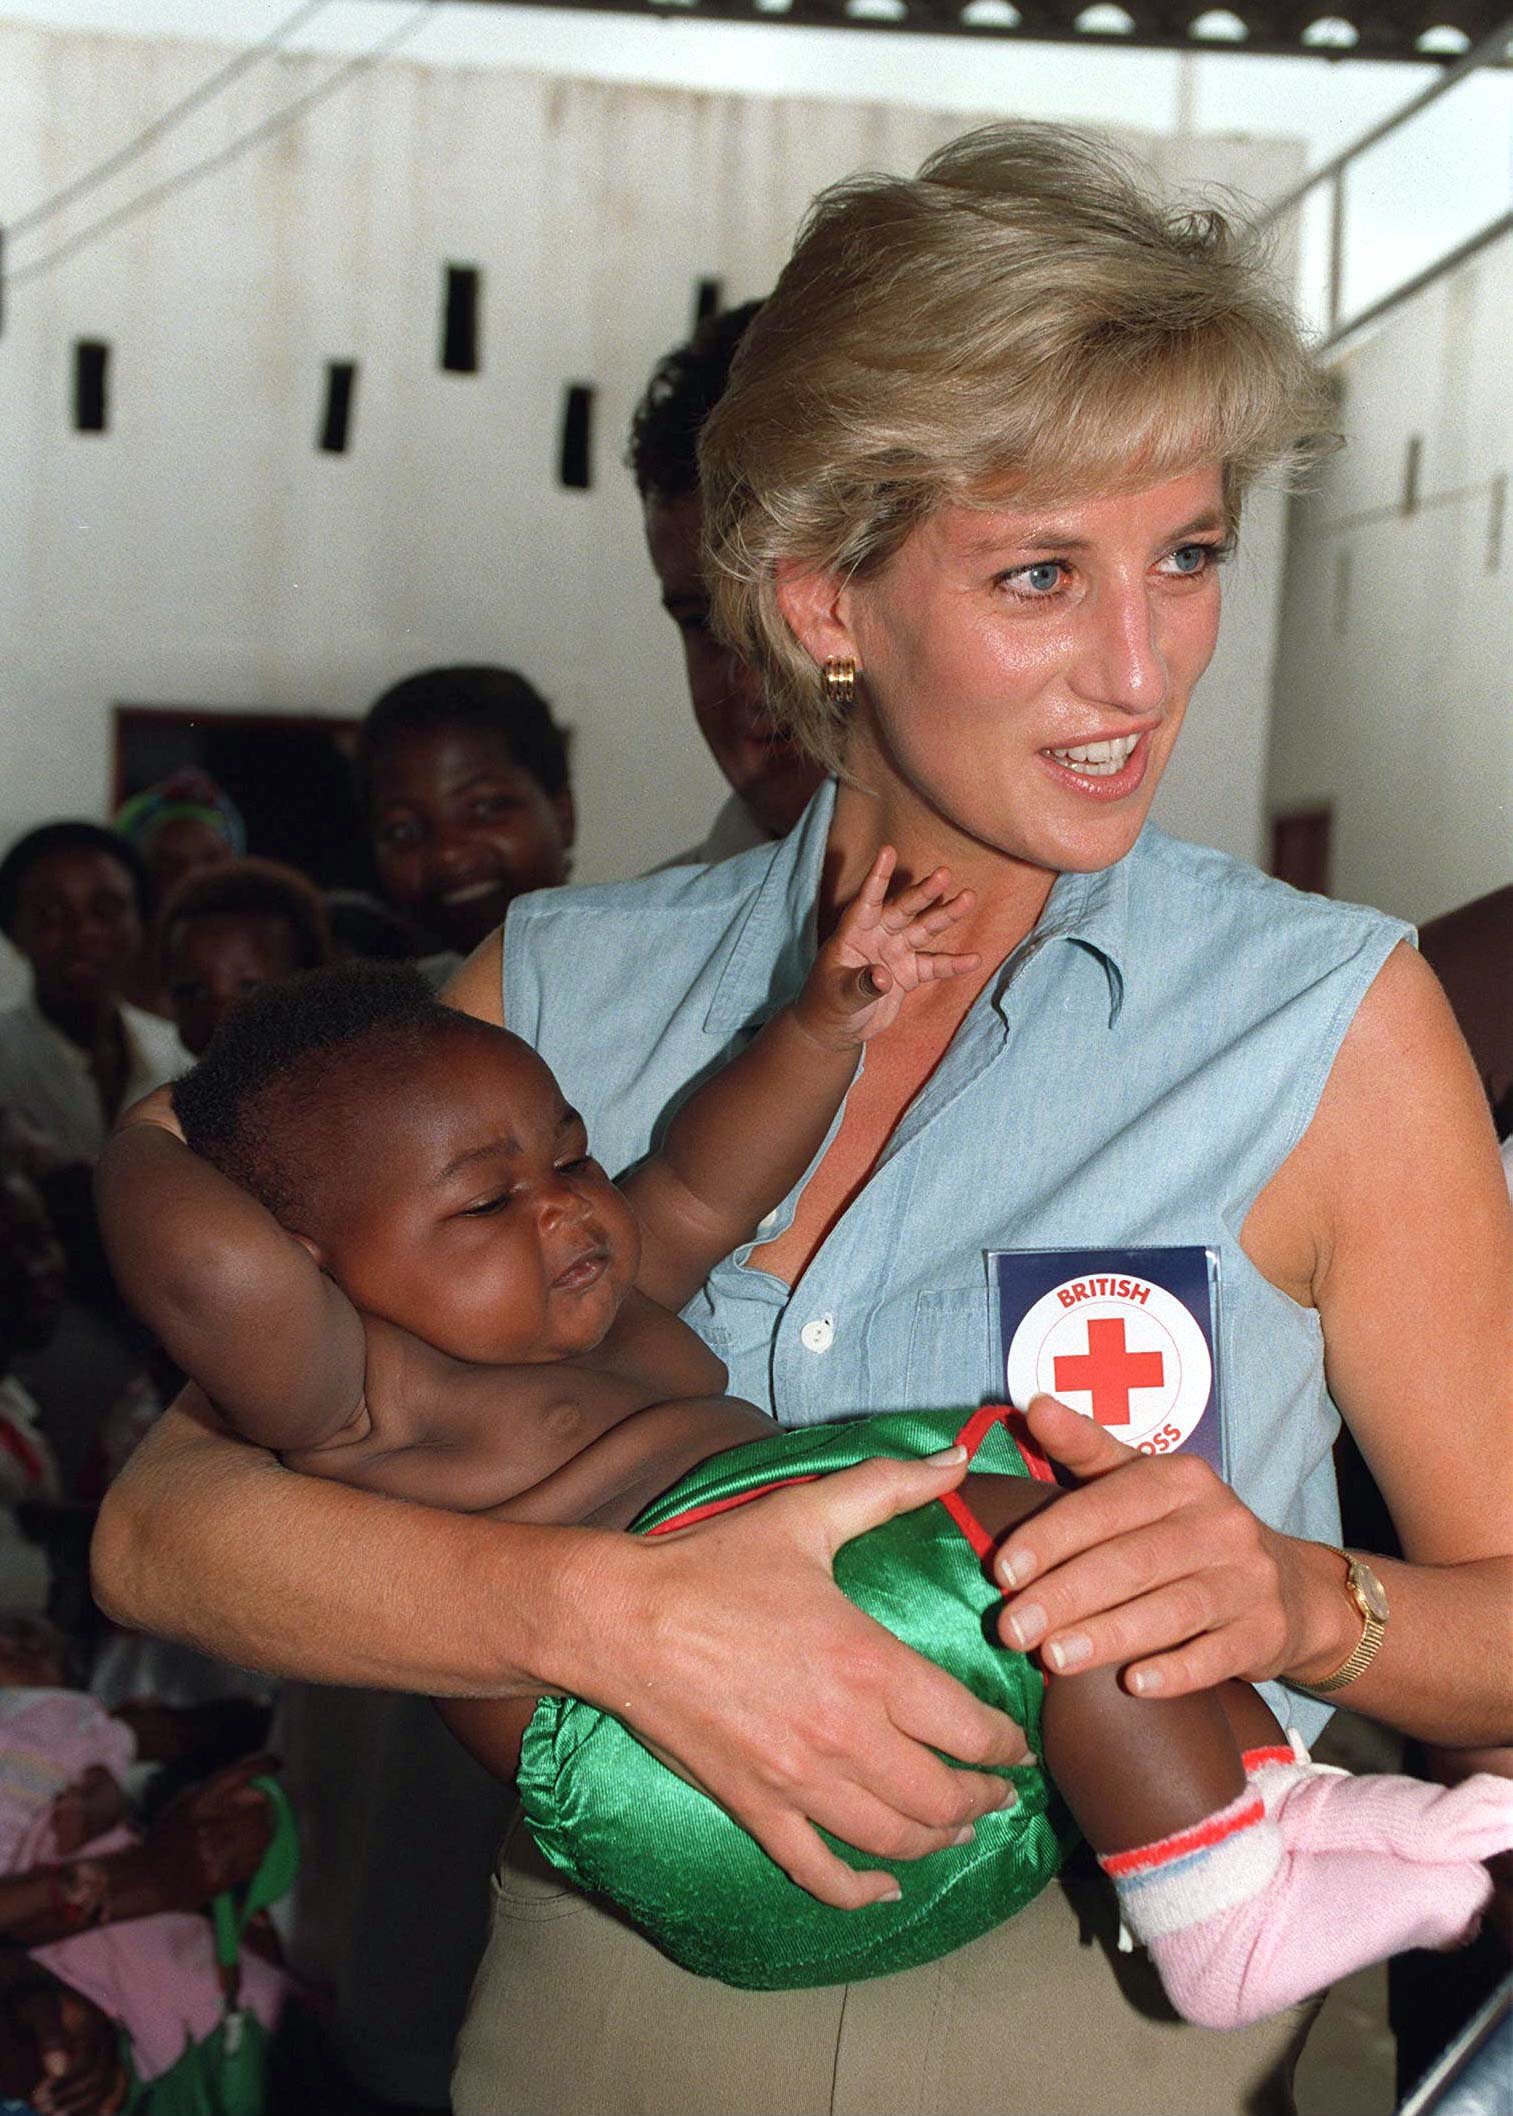 Princess Diana In Luanda, Angola. She Holds A Baby During Her Visit To A Orthopaedic Centre For Landmine Victims And Wears A Badge For The British Red Cross Charity on January 14, 1997. | Source: Getty Images